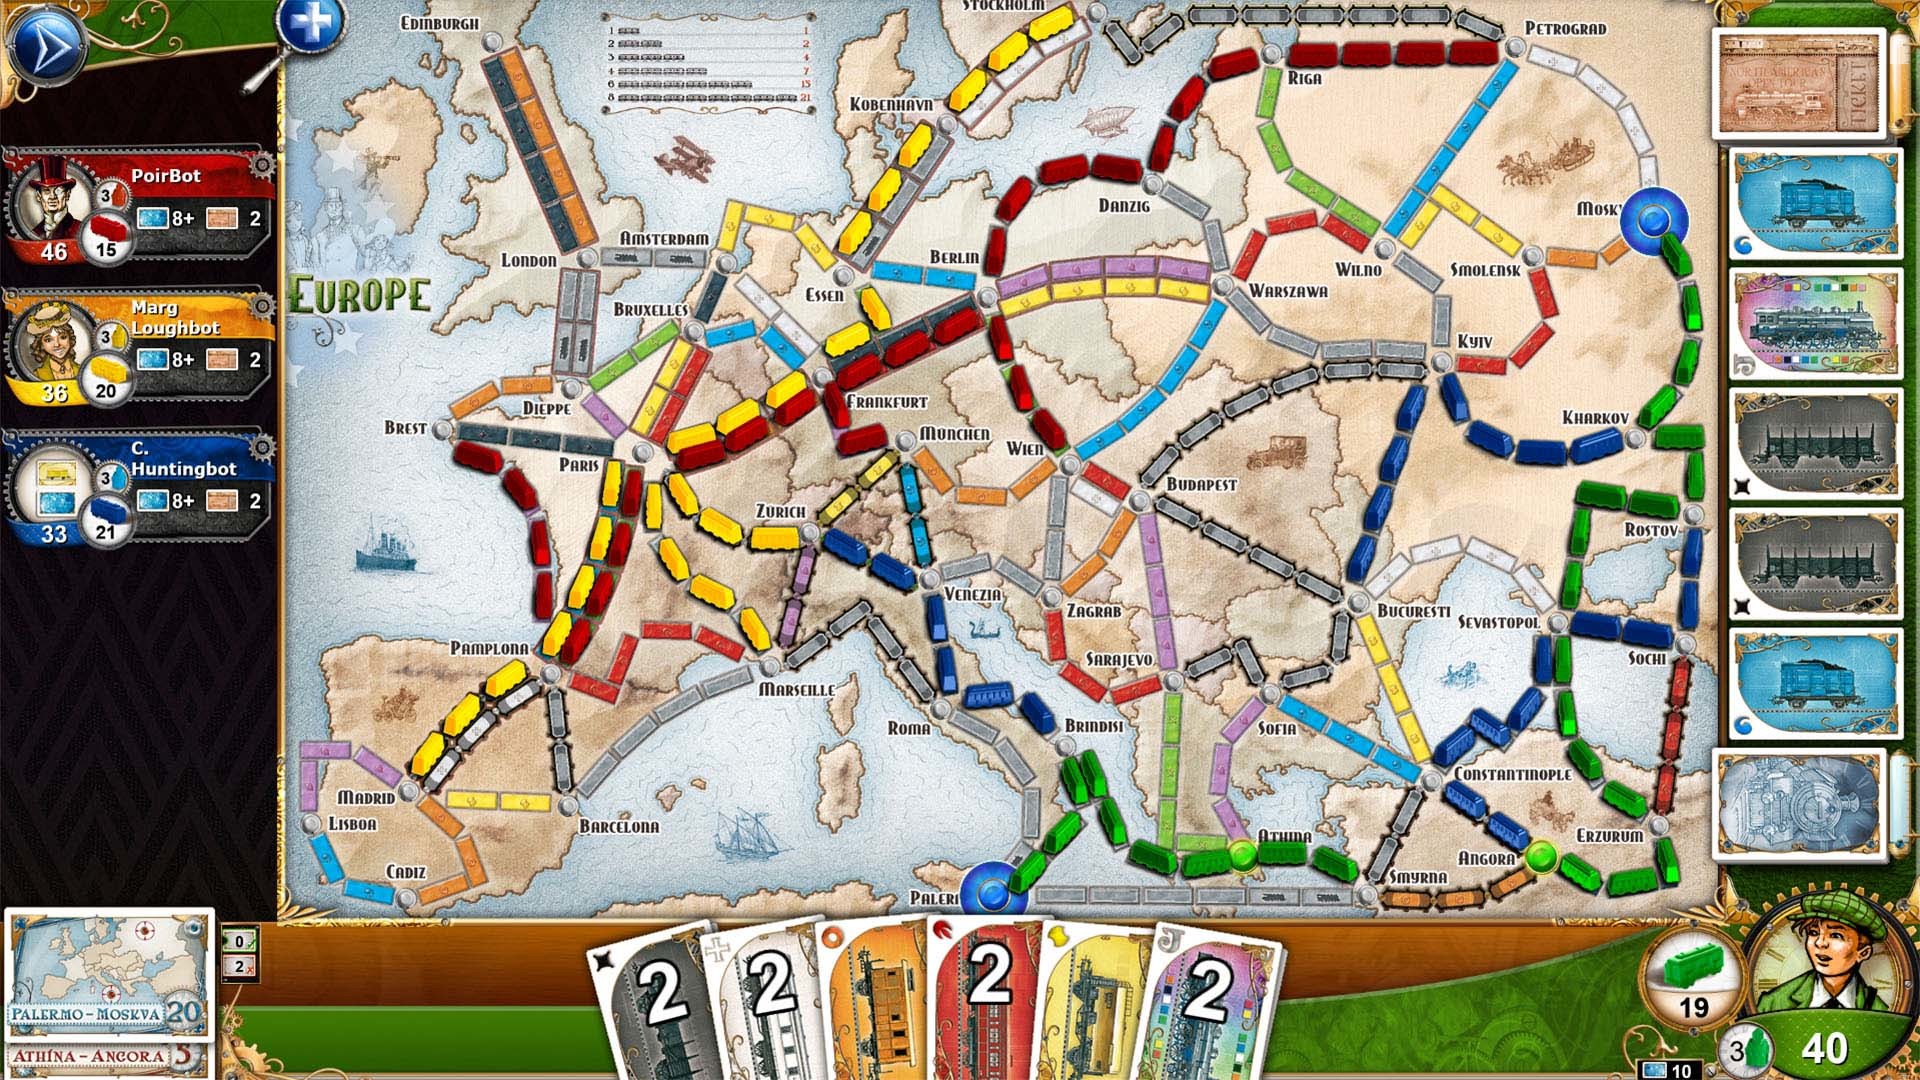 Save 30% on Ticket to Ride - Europe on Steam